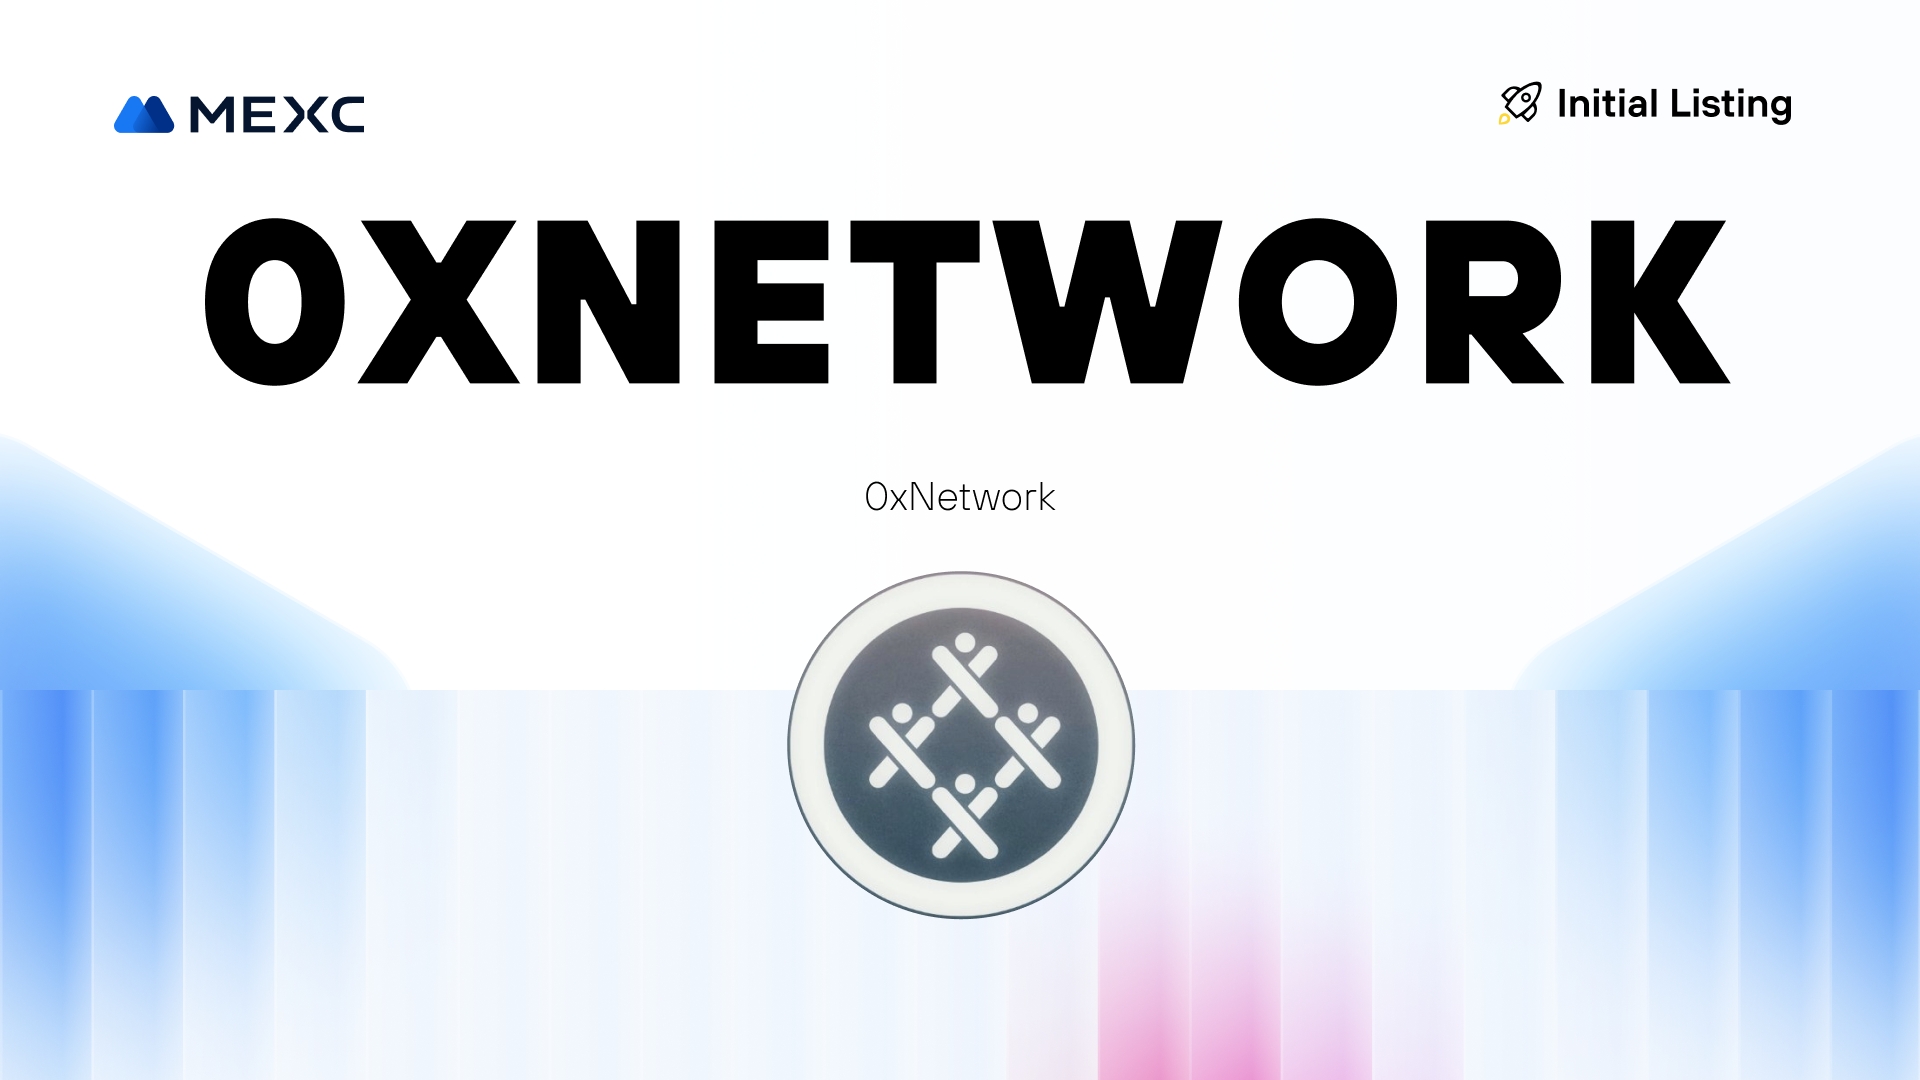 What is 0xNetwork – A Secure, Decentralized decentralized P2P VPN Network (0XNETWORK)